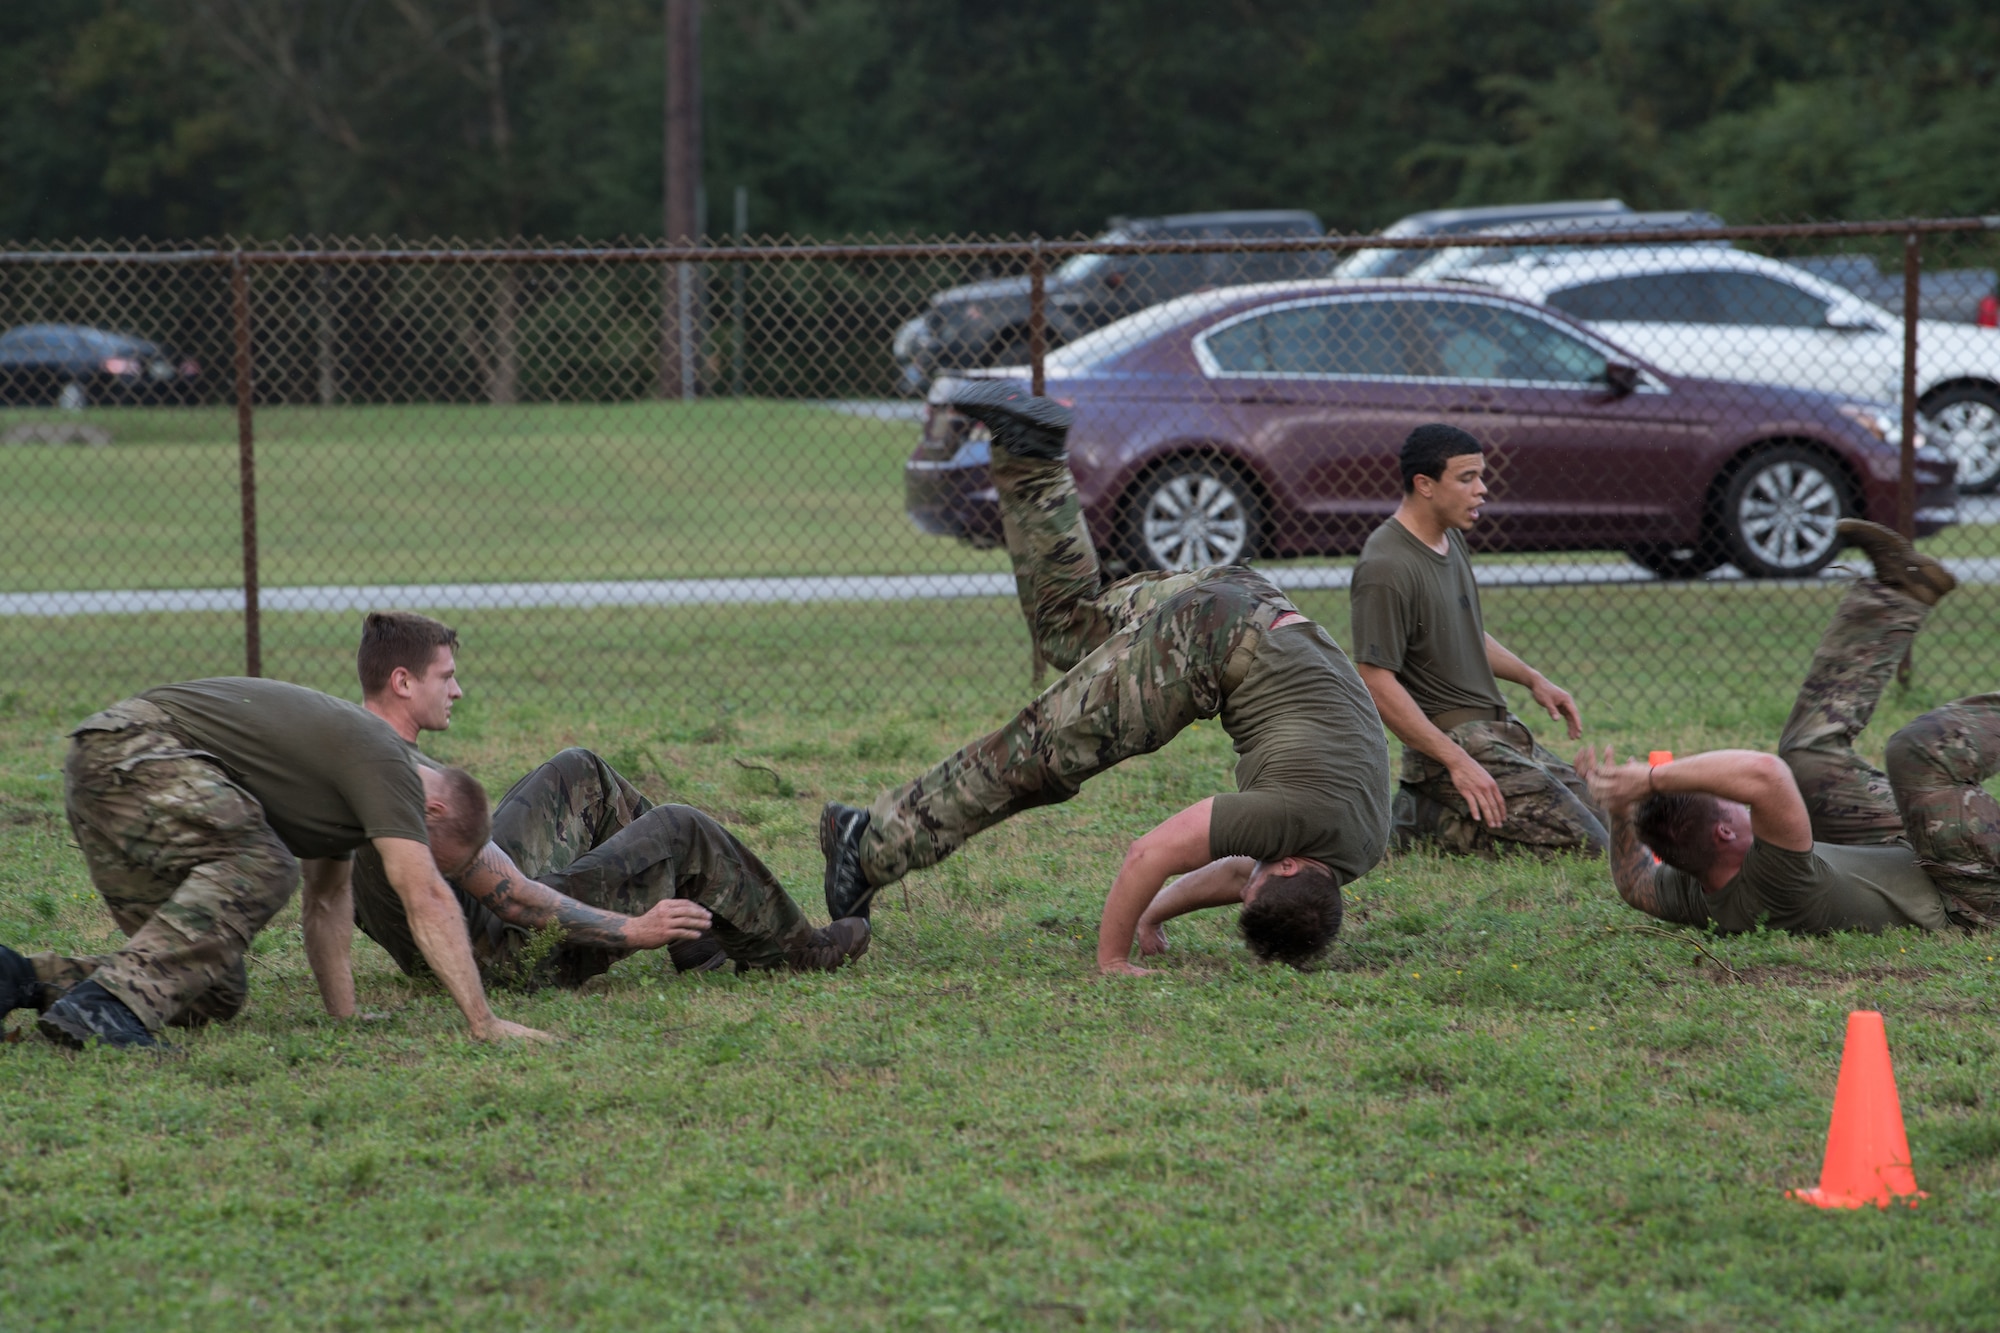 Special Tactics tactical air control party candidates perform forward somersaults as they roll forward across the grass field.